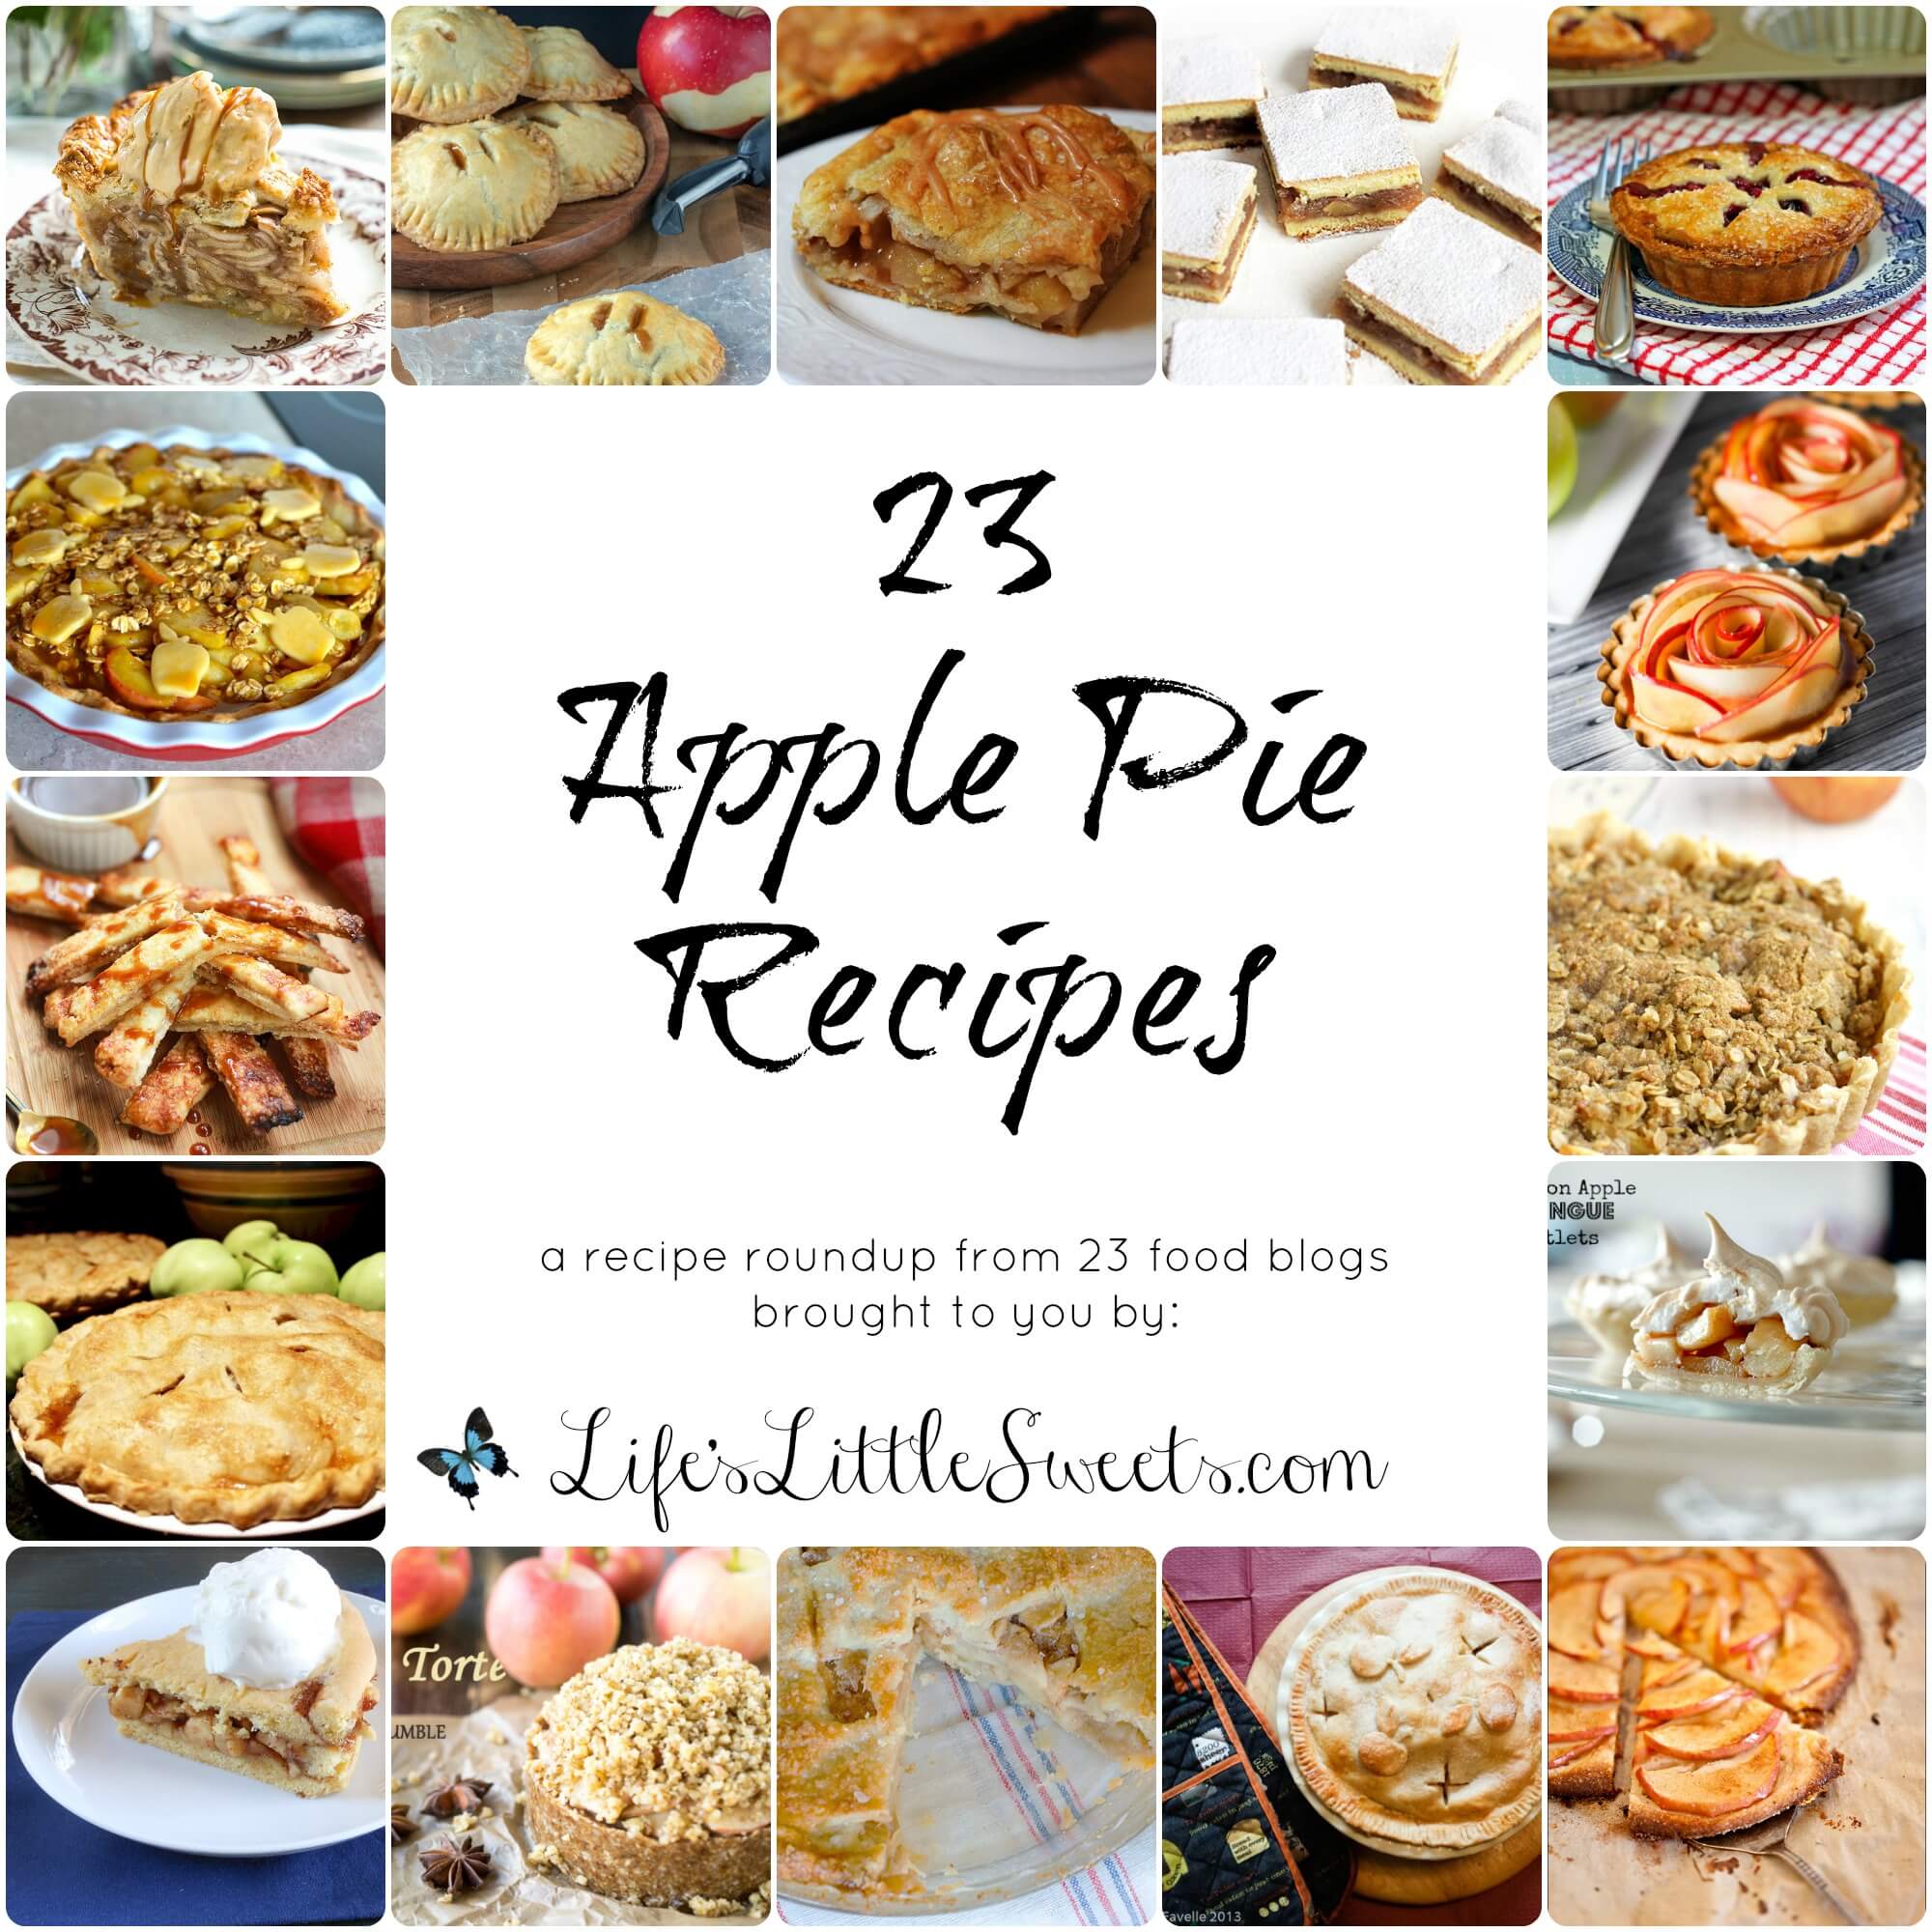 This recipe roundup is all about celebrating the iconic apple pie. Apple pie is an American classic but it has other iterations in other countries and cultures as well. Find yourself with tons of apples because it’s apple season? Here in New Jersey, the apple season starts September 1st and goes as late as October 31st. Just love a good slice ‘o pie any time of the year? You have come to the right place! Here are 23 apple pie recipes to show you there’s more than one way to make apple pie!